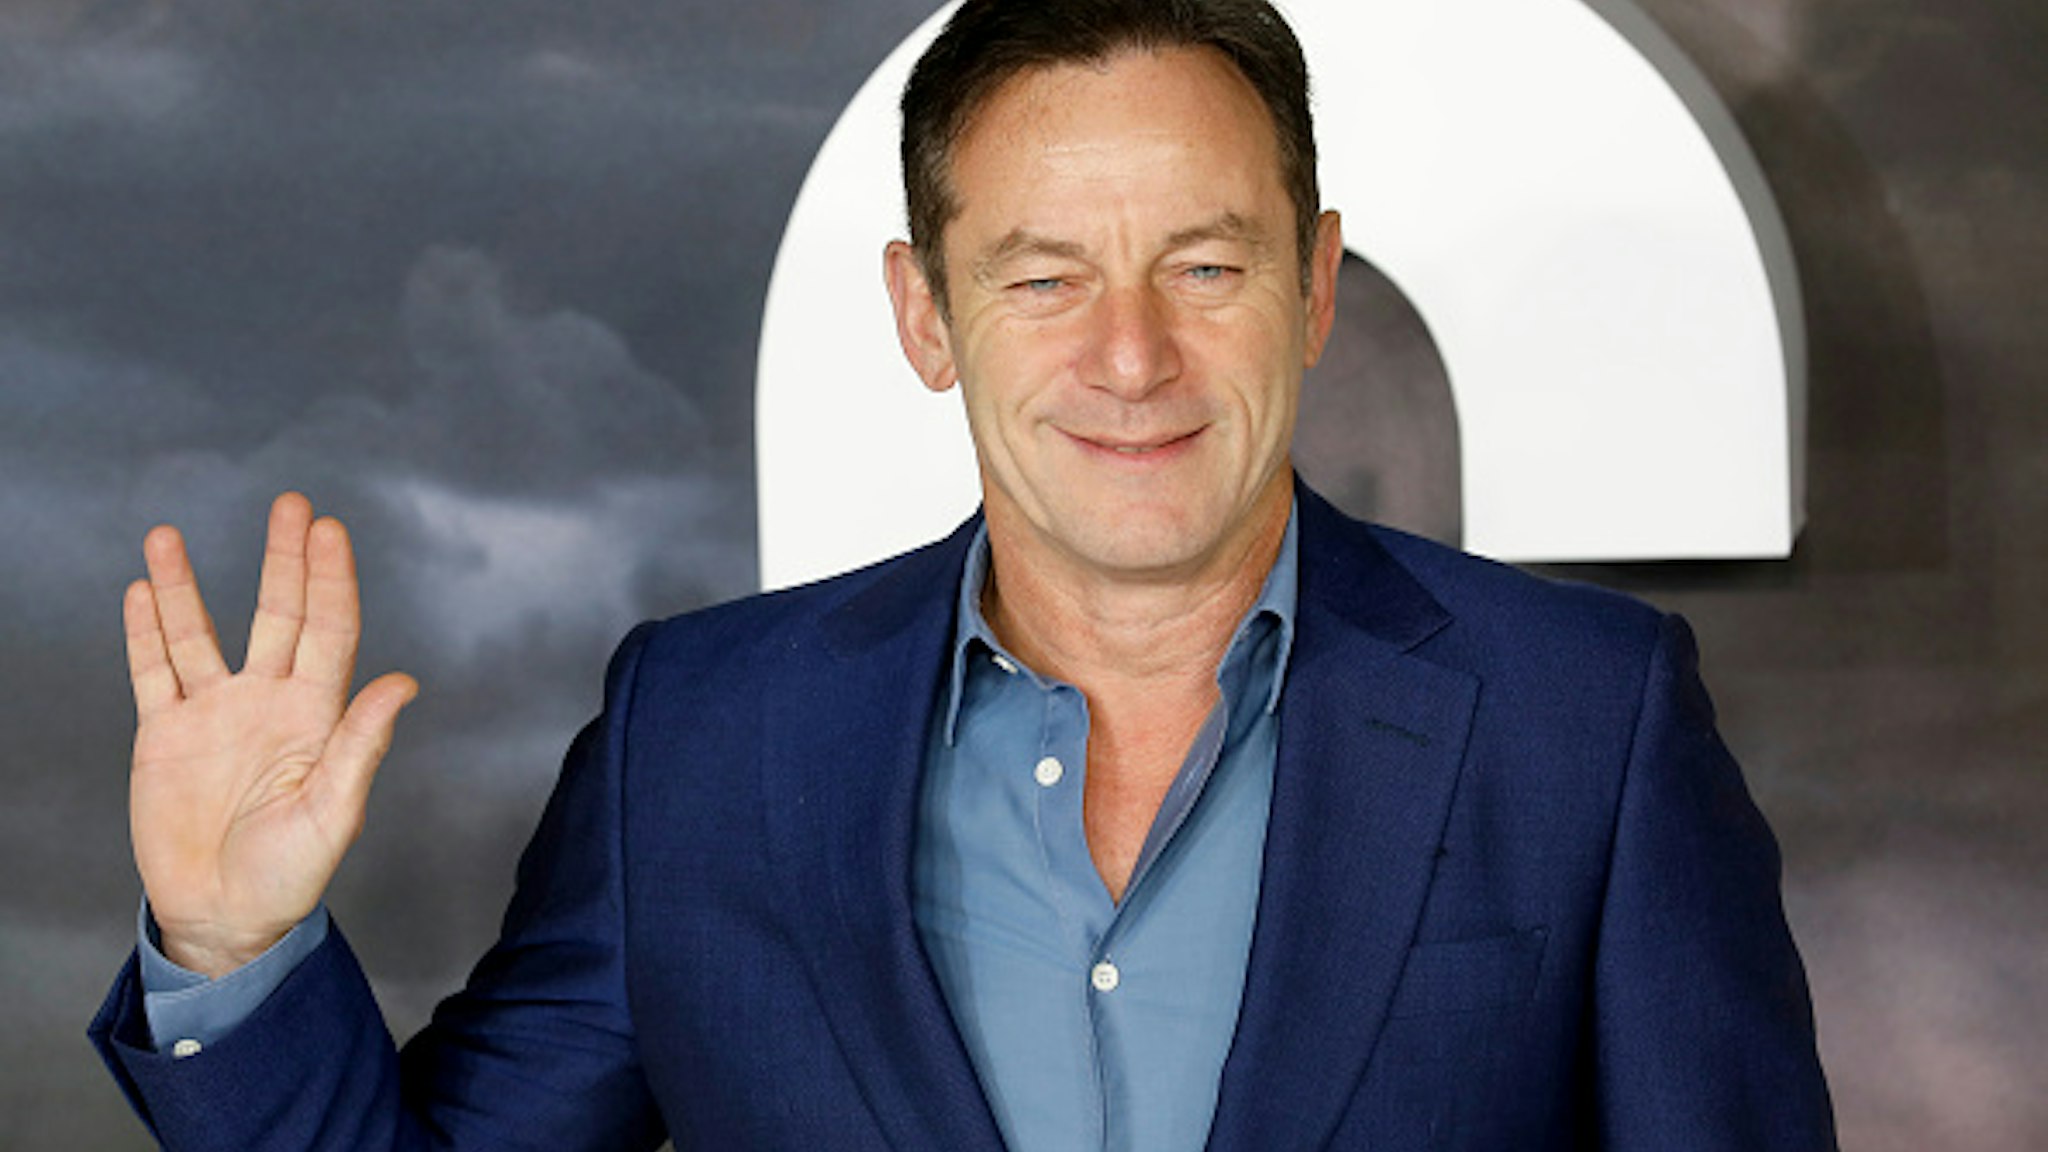 Jason Isaacs attending the Star Trek: Picard Premiere held at the Odeon Luxe Leicester Square, London.